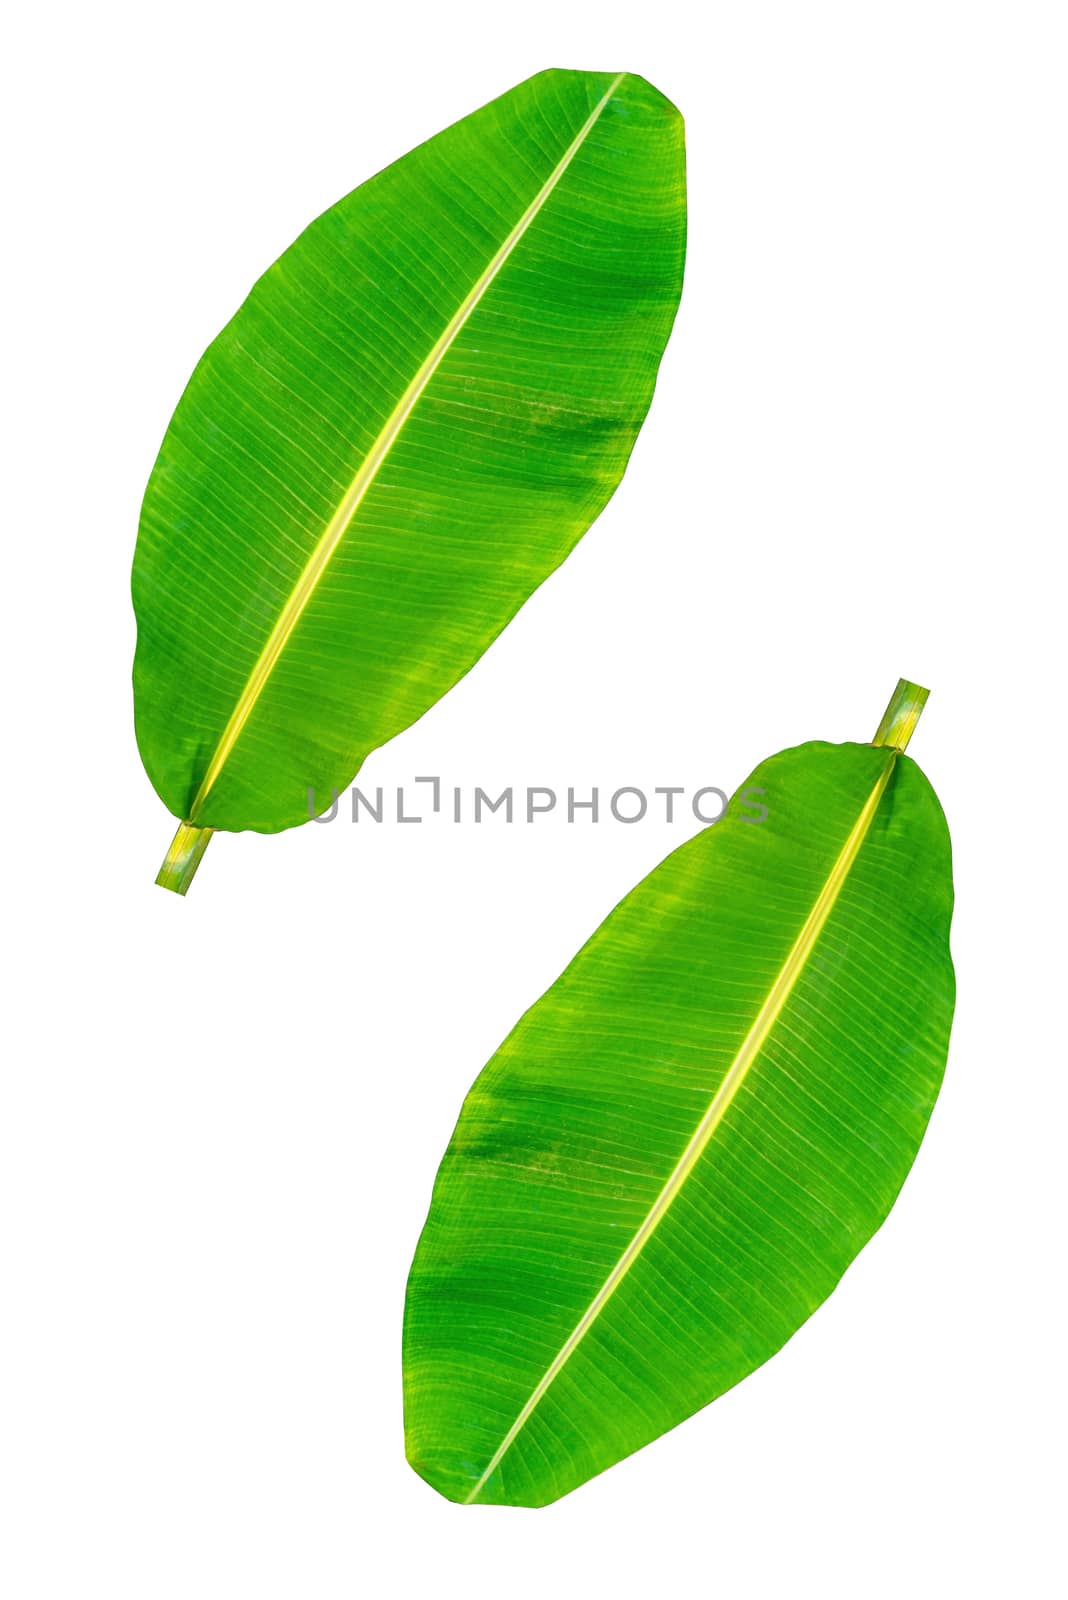 Banana leaf, green leaves, isolated on white background, Clipping paths